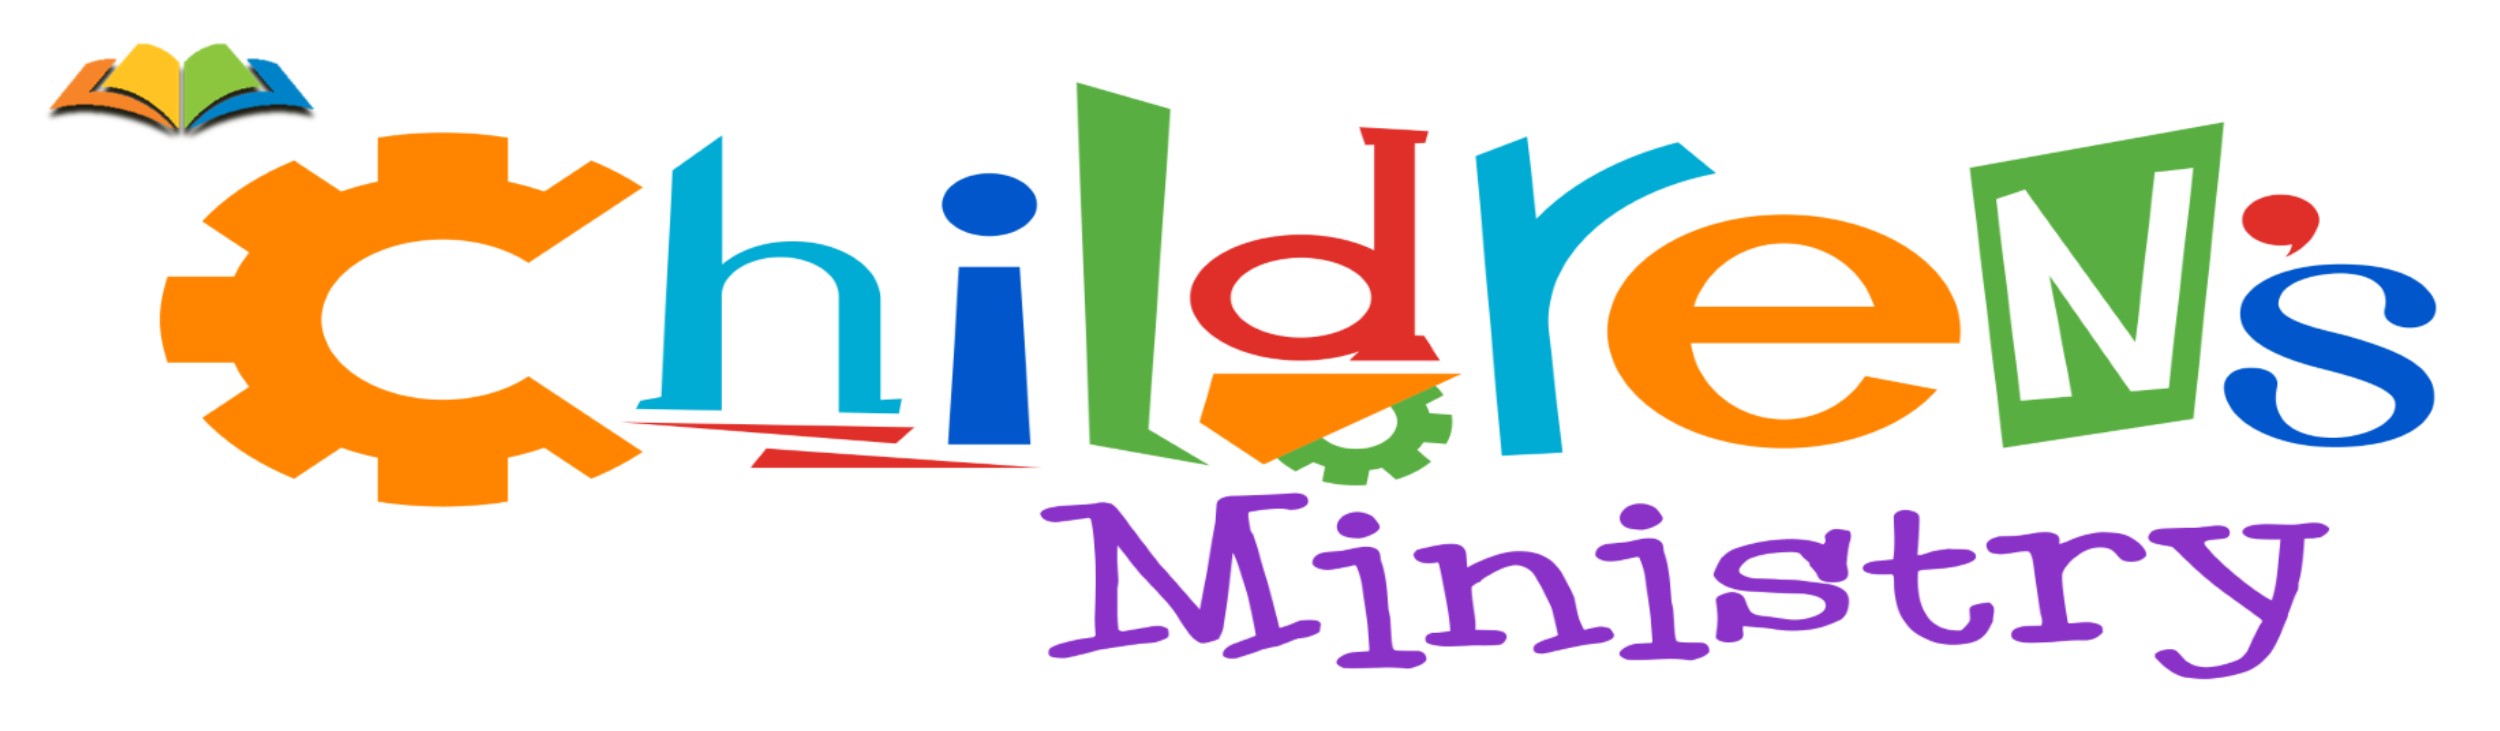 childens ministry